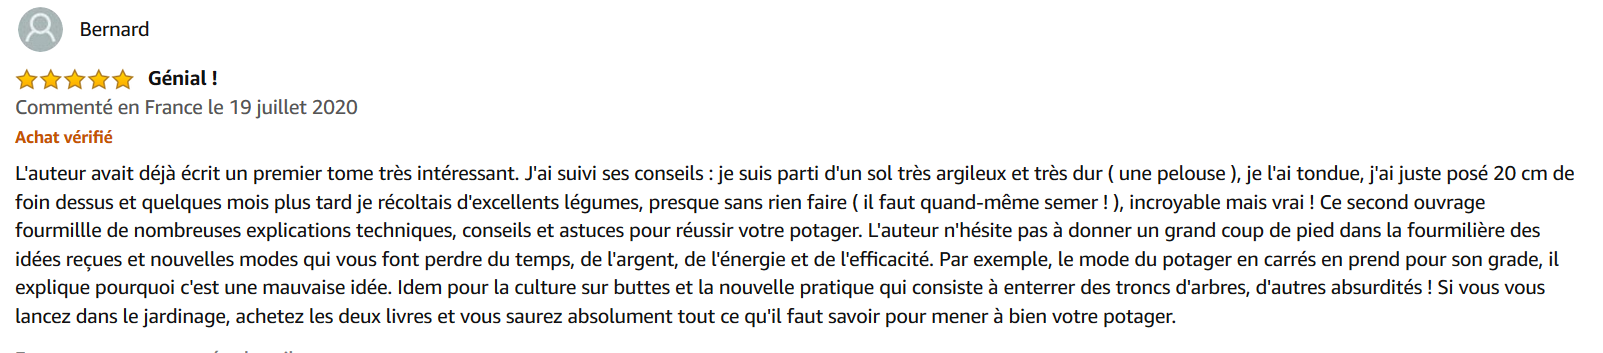 2020-07-31_21h02_48 commentaire Amazon.png